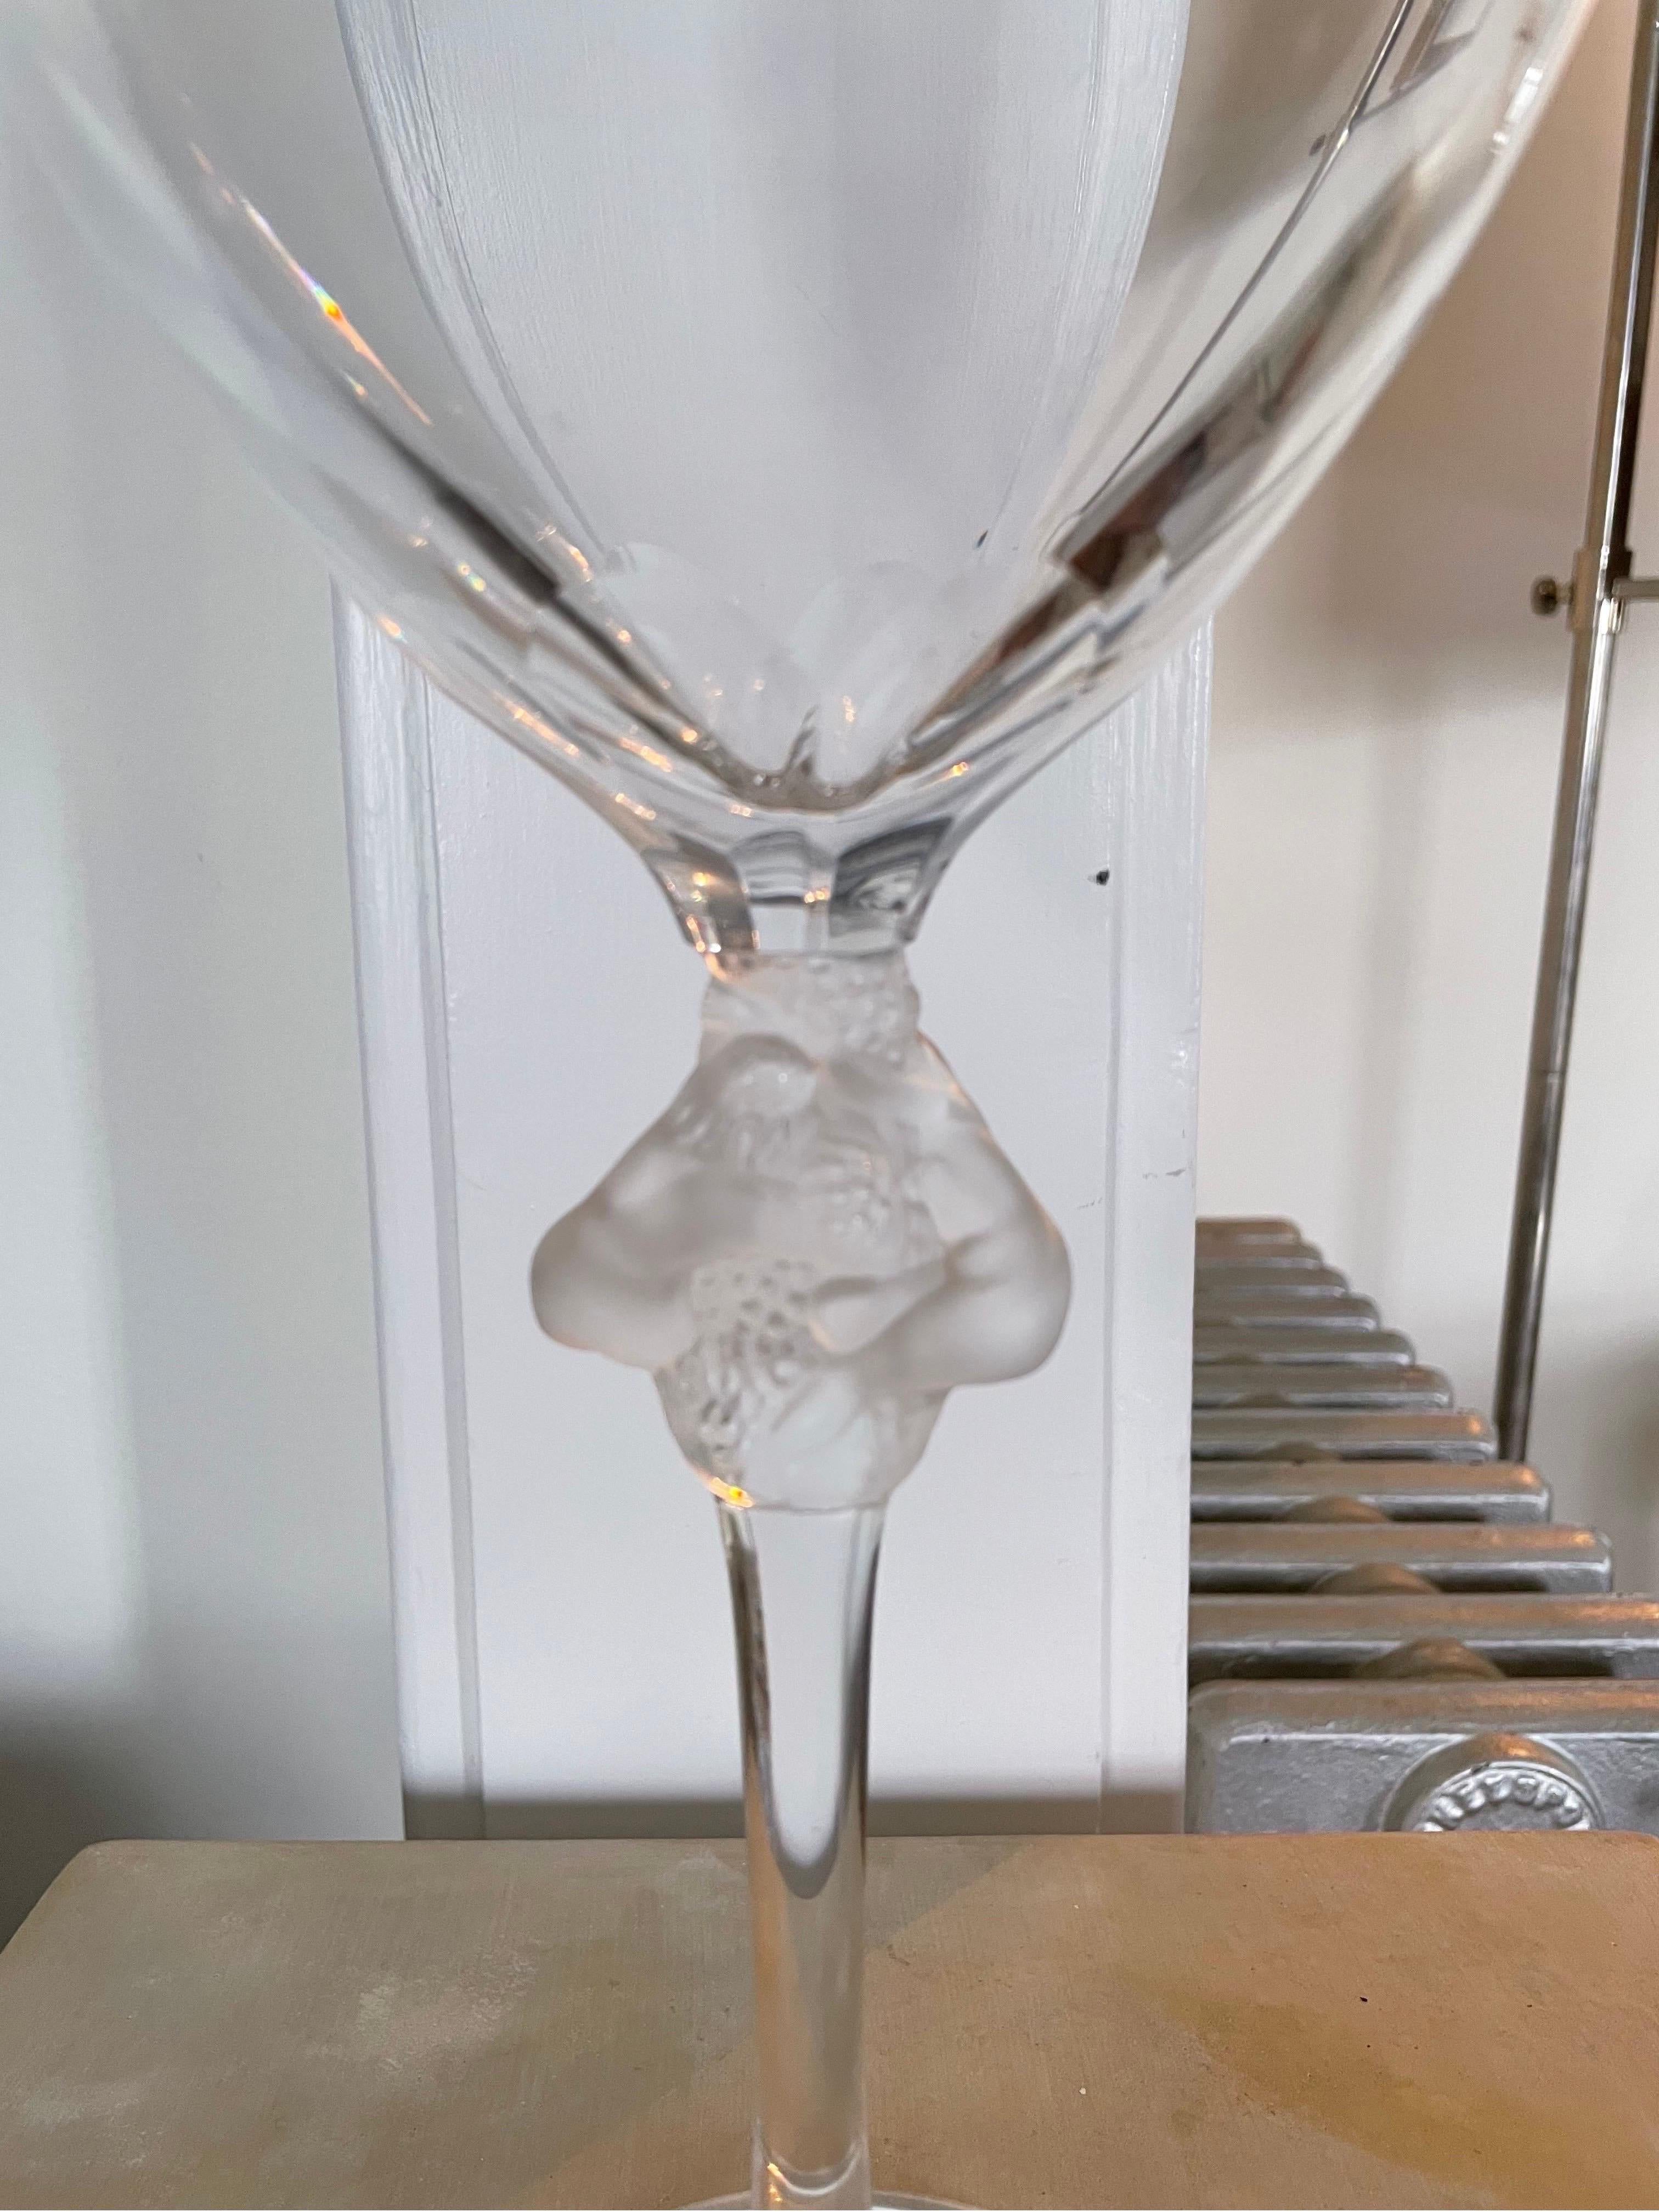 Beautiful Large Lalique Goblet vase Roxane Pattern. 2 nude figures embracing grapes or flowers. Nicely proportioned and balanced.